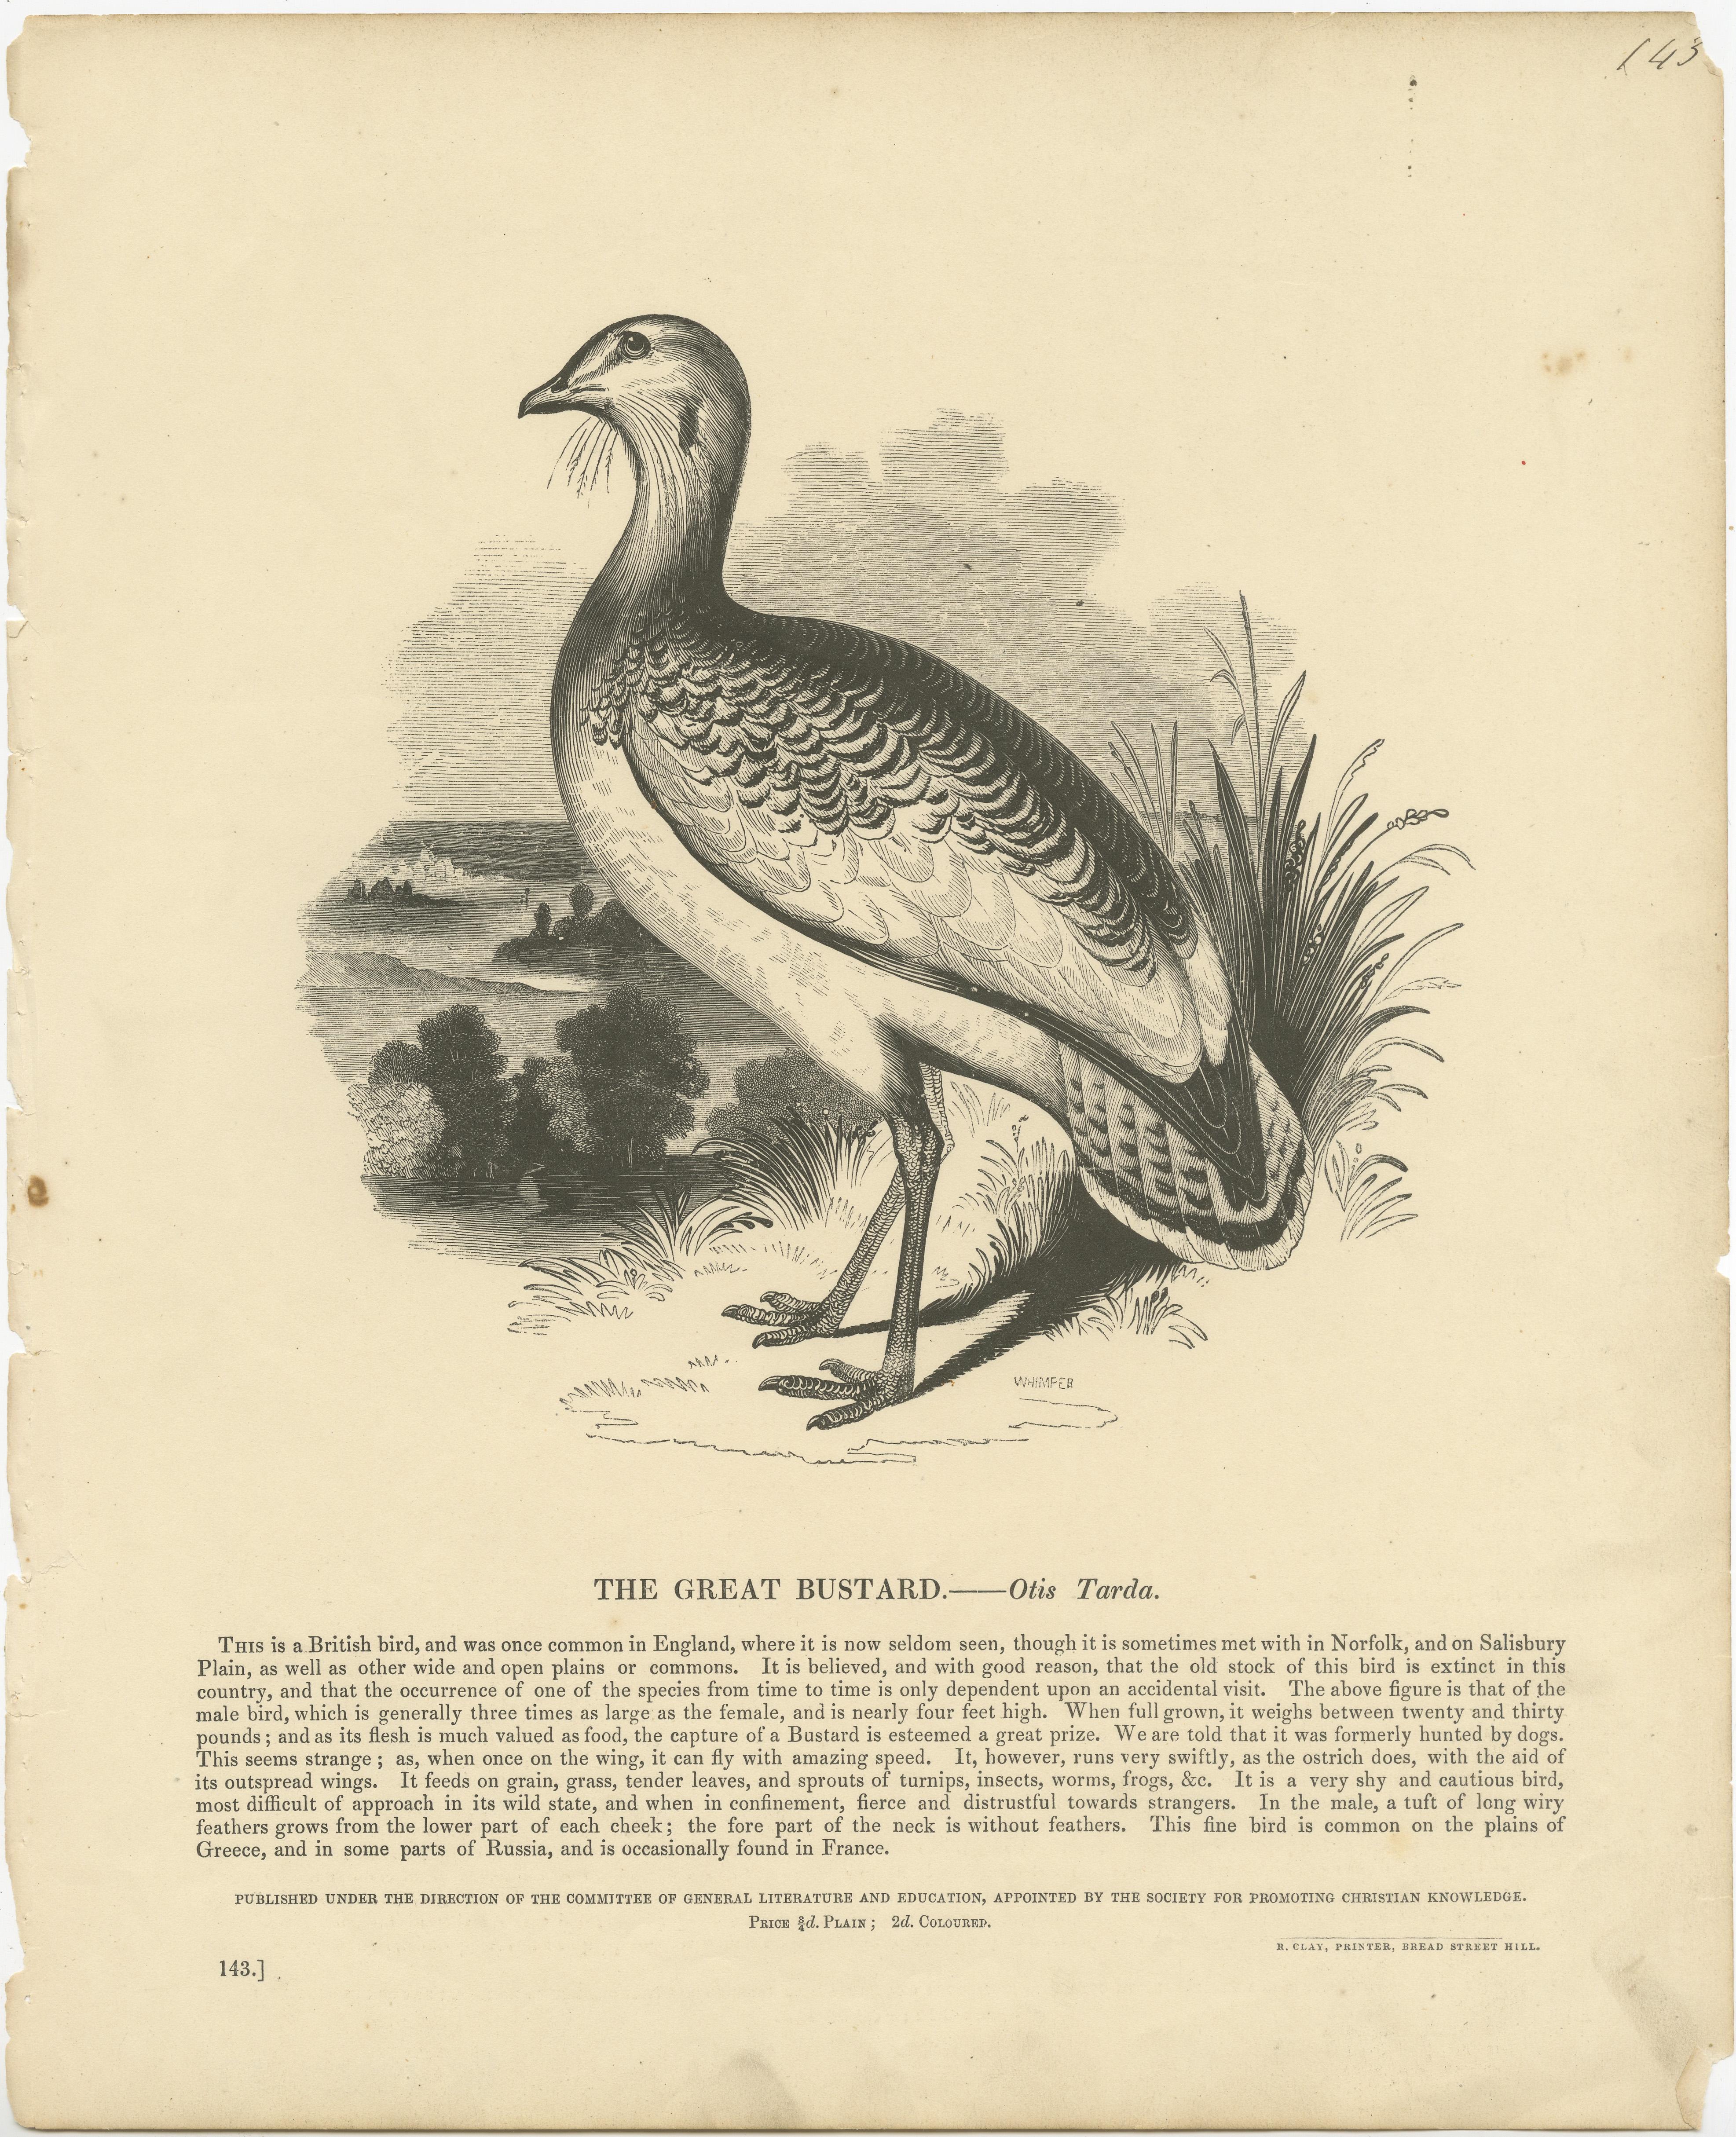 Antique print titled 'The Great Bustard, Otis Tarda'. Original antique print of the great bustard. This print originates from 'The Illustrative Natural History' by The Society for Promoting Christian Knowledge. Published circa 1875.